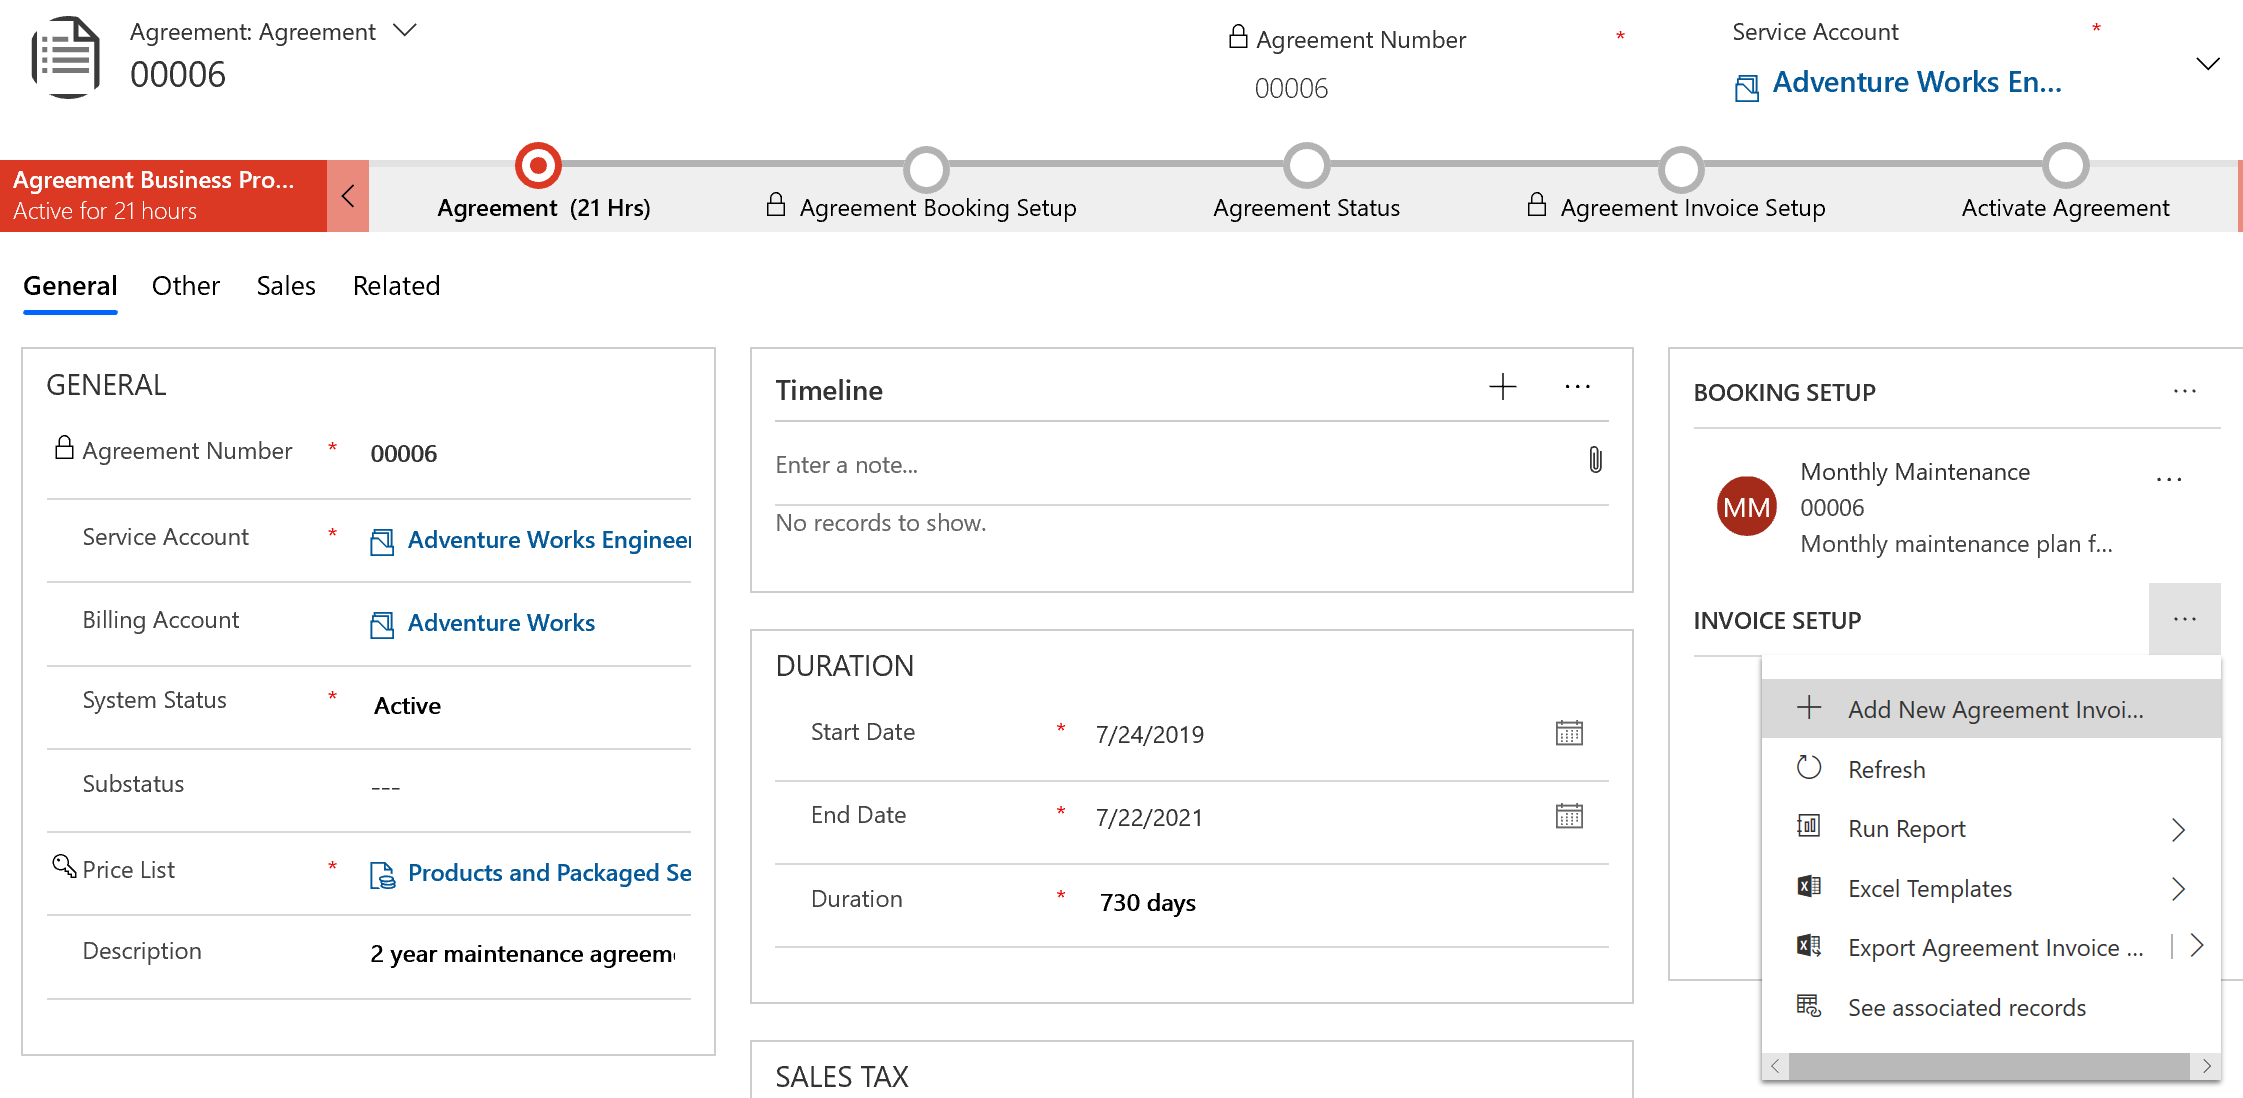 Screenshot of an agreement showing the add new agreement invoice option under invoice setup.